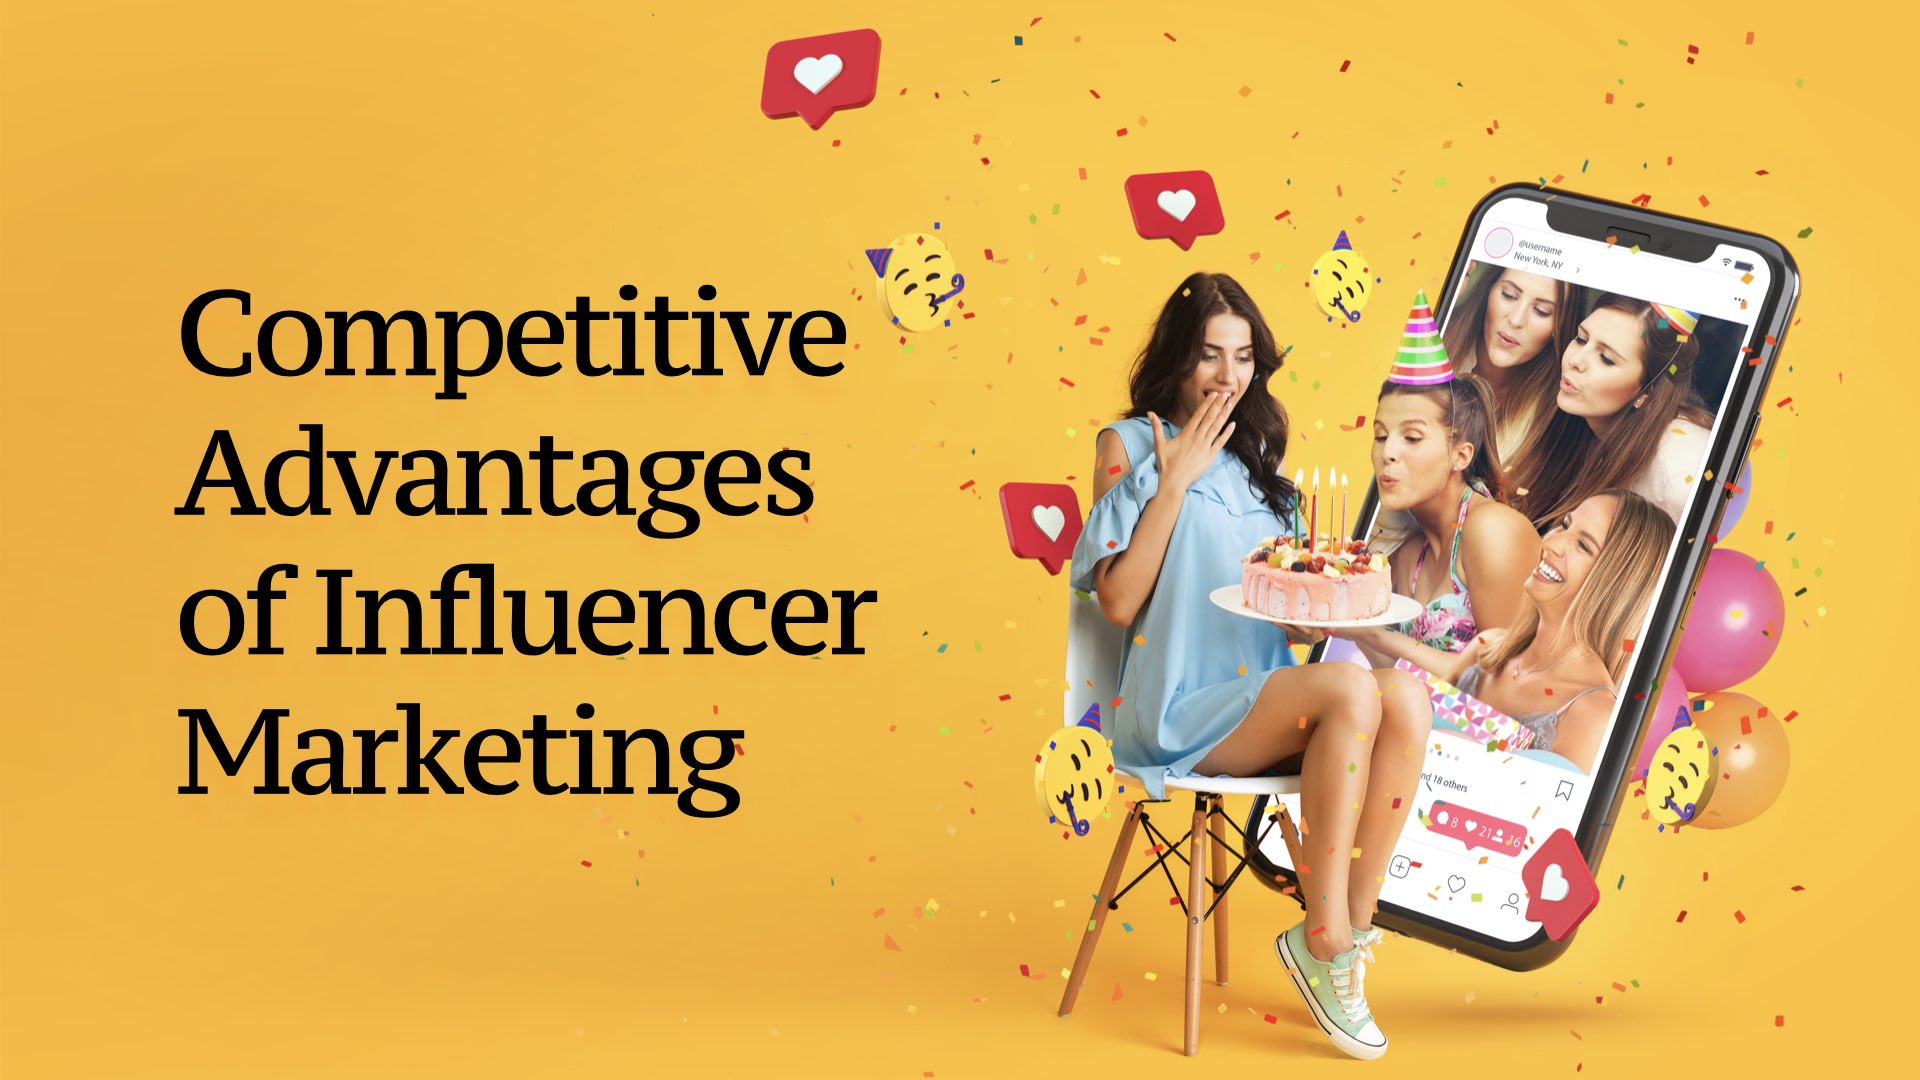 Competitive Advantages of Influencer Marketing